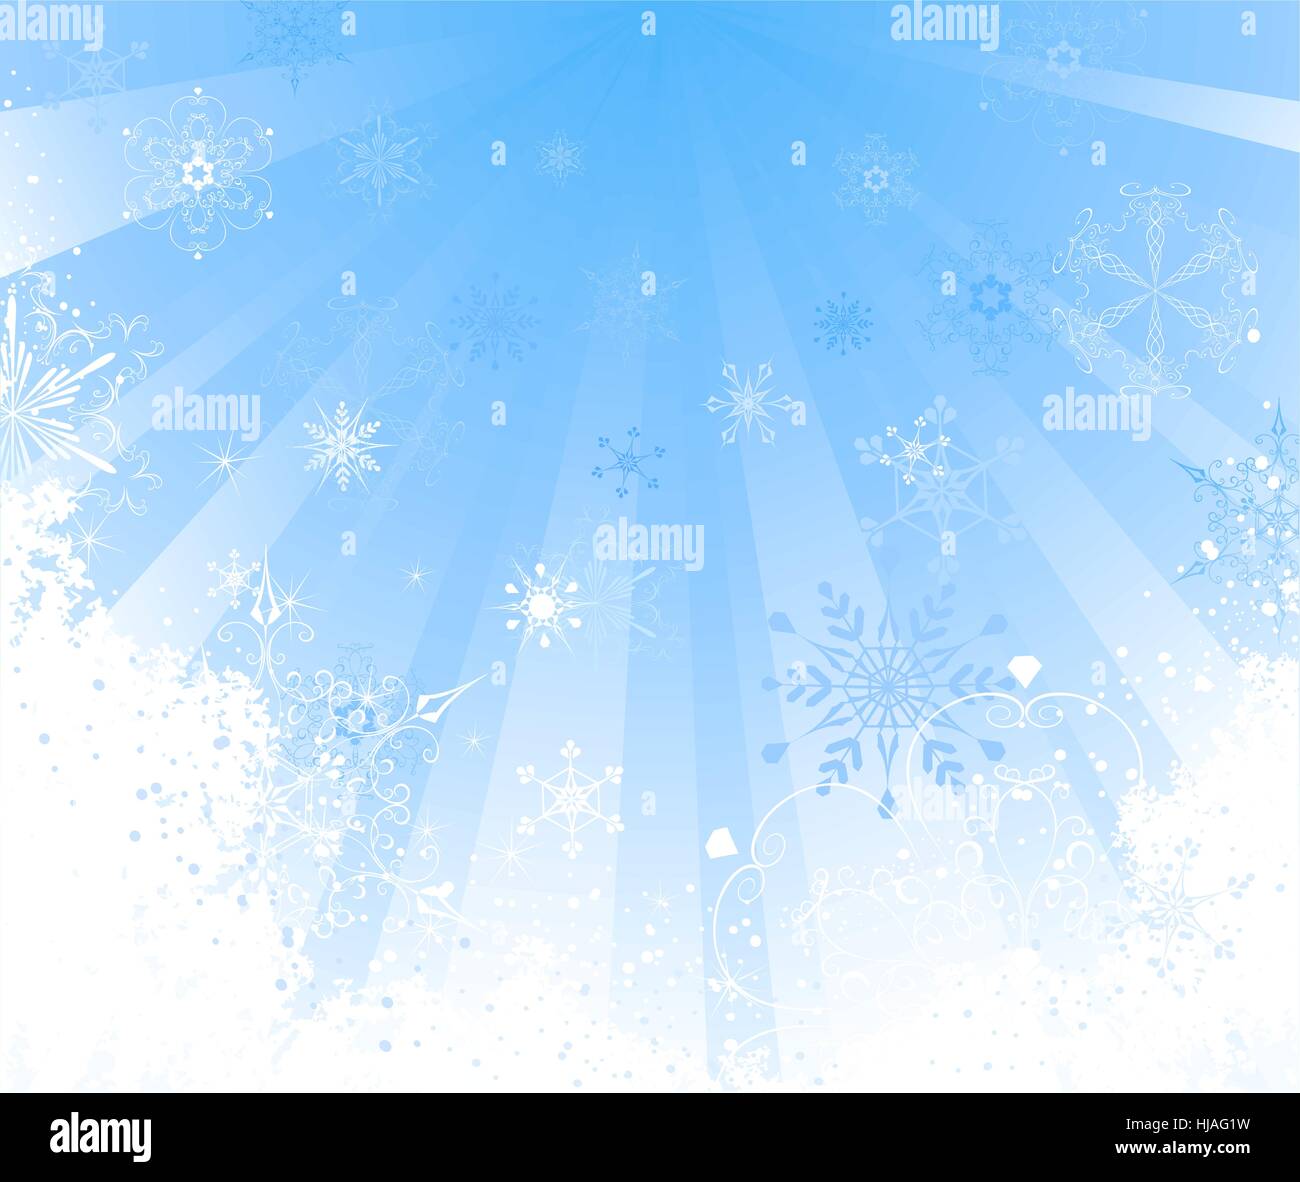 bright, radiant, blue background with a white patterned snowflakes. Stock Vector